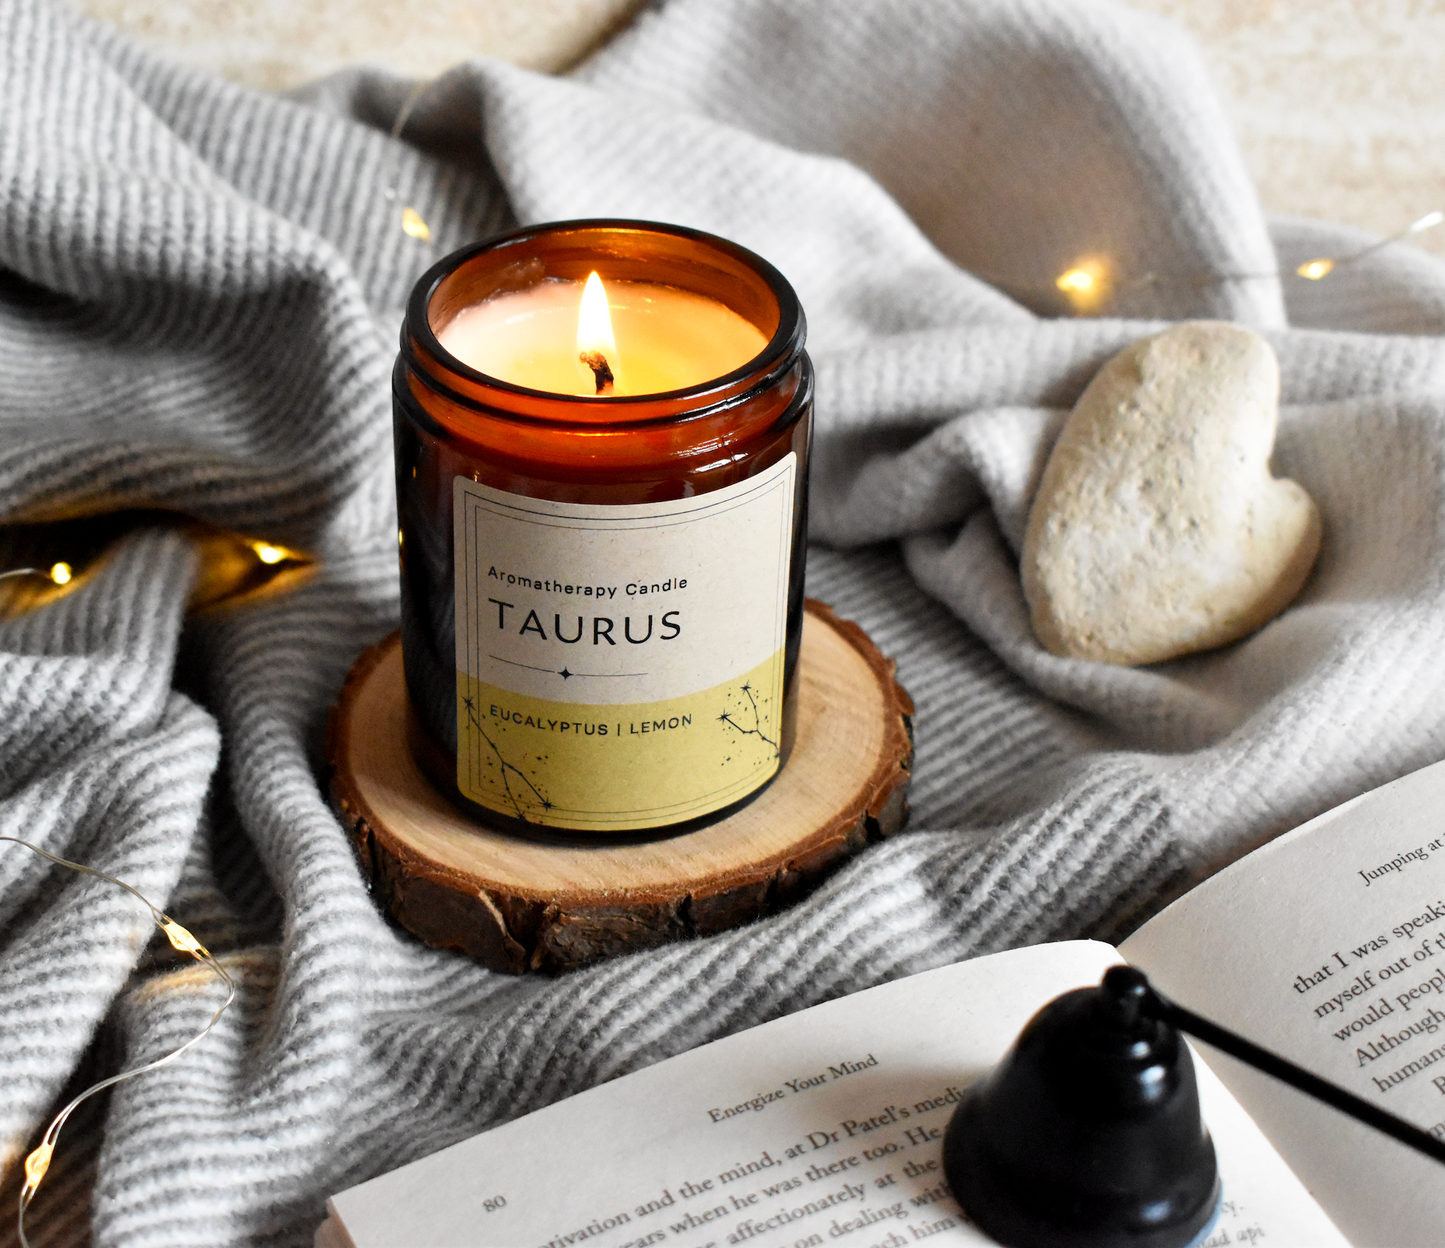 Zodiac Candle TAURUS - Infused with Eucalyptus & Lemon essential oil, Astrology Candle